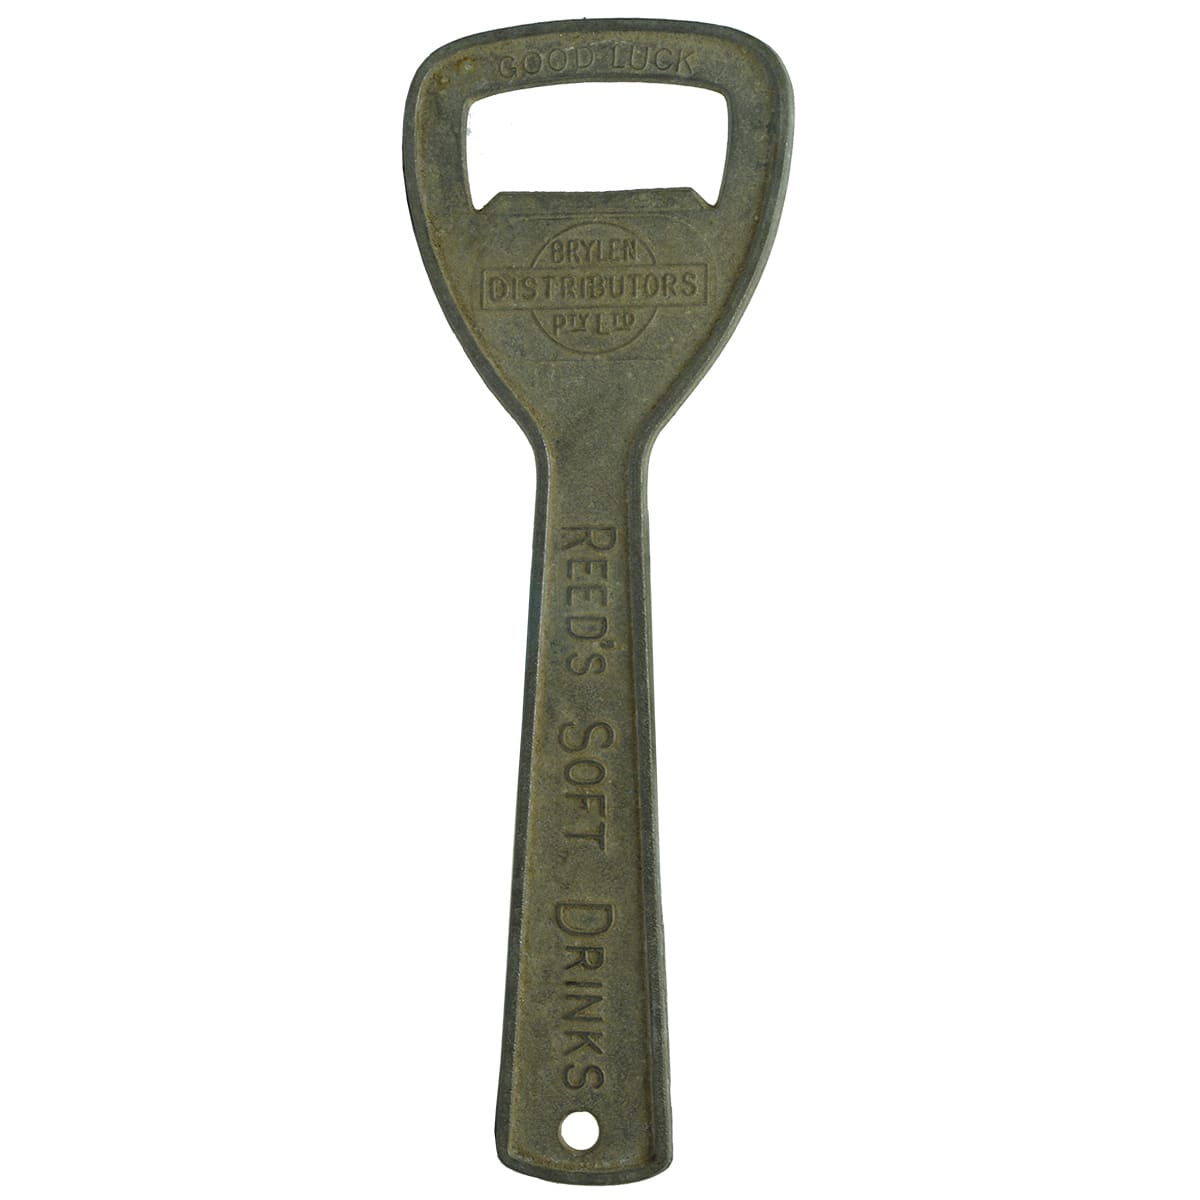 Large advertising crown seal bottle opener for Reed's Soft Drinks.